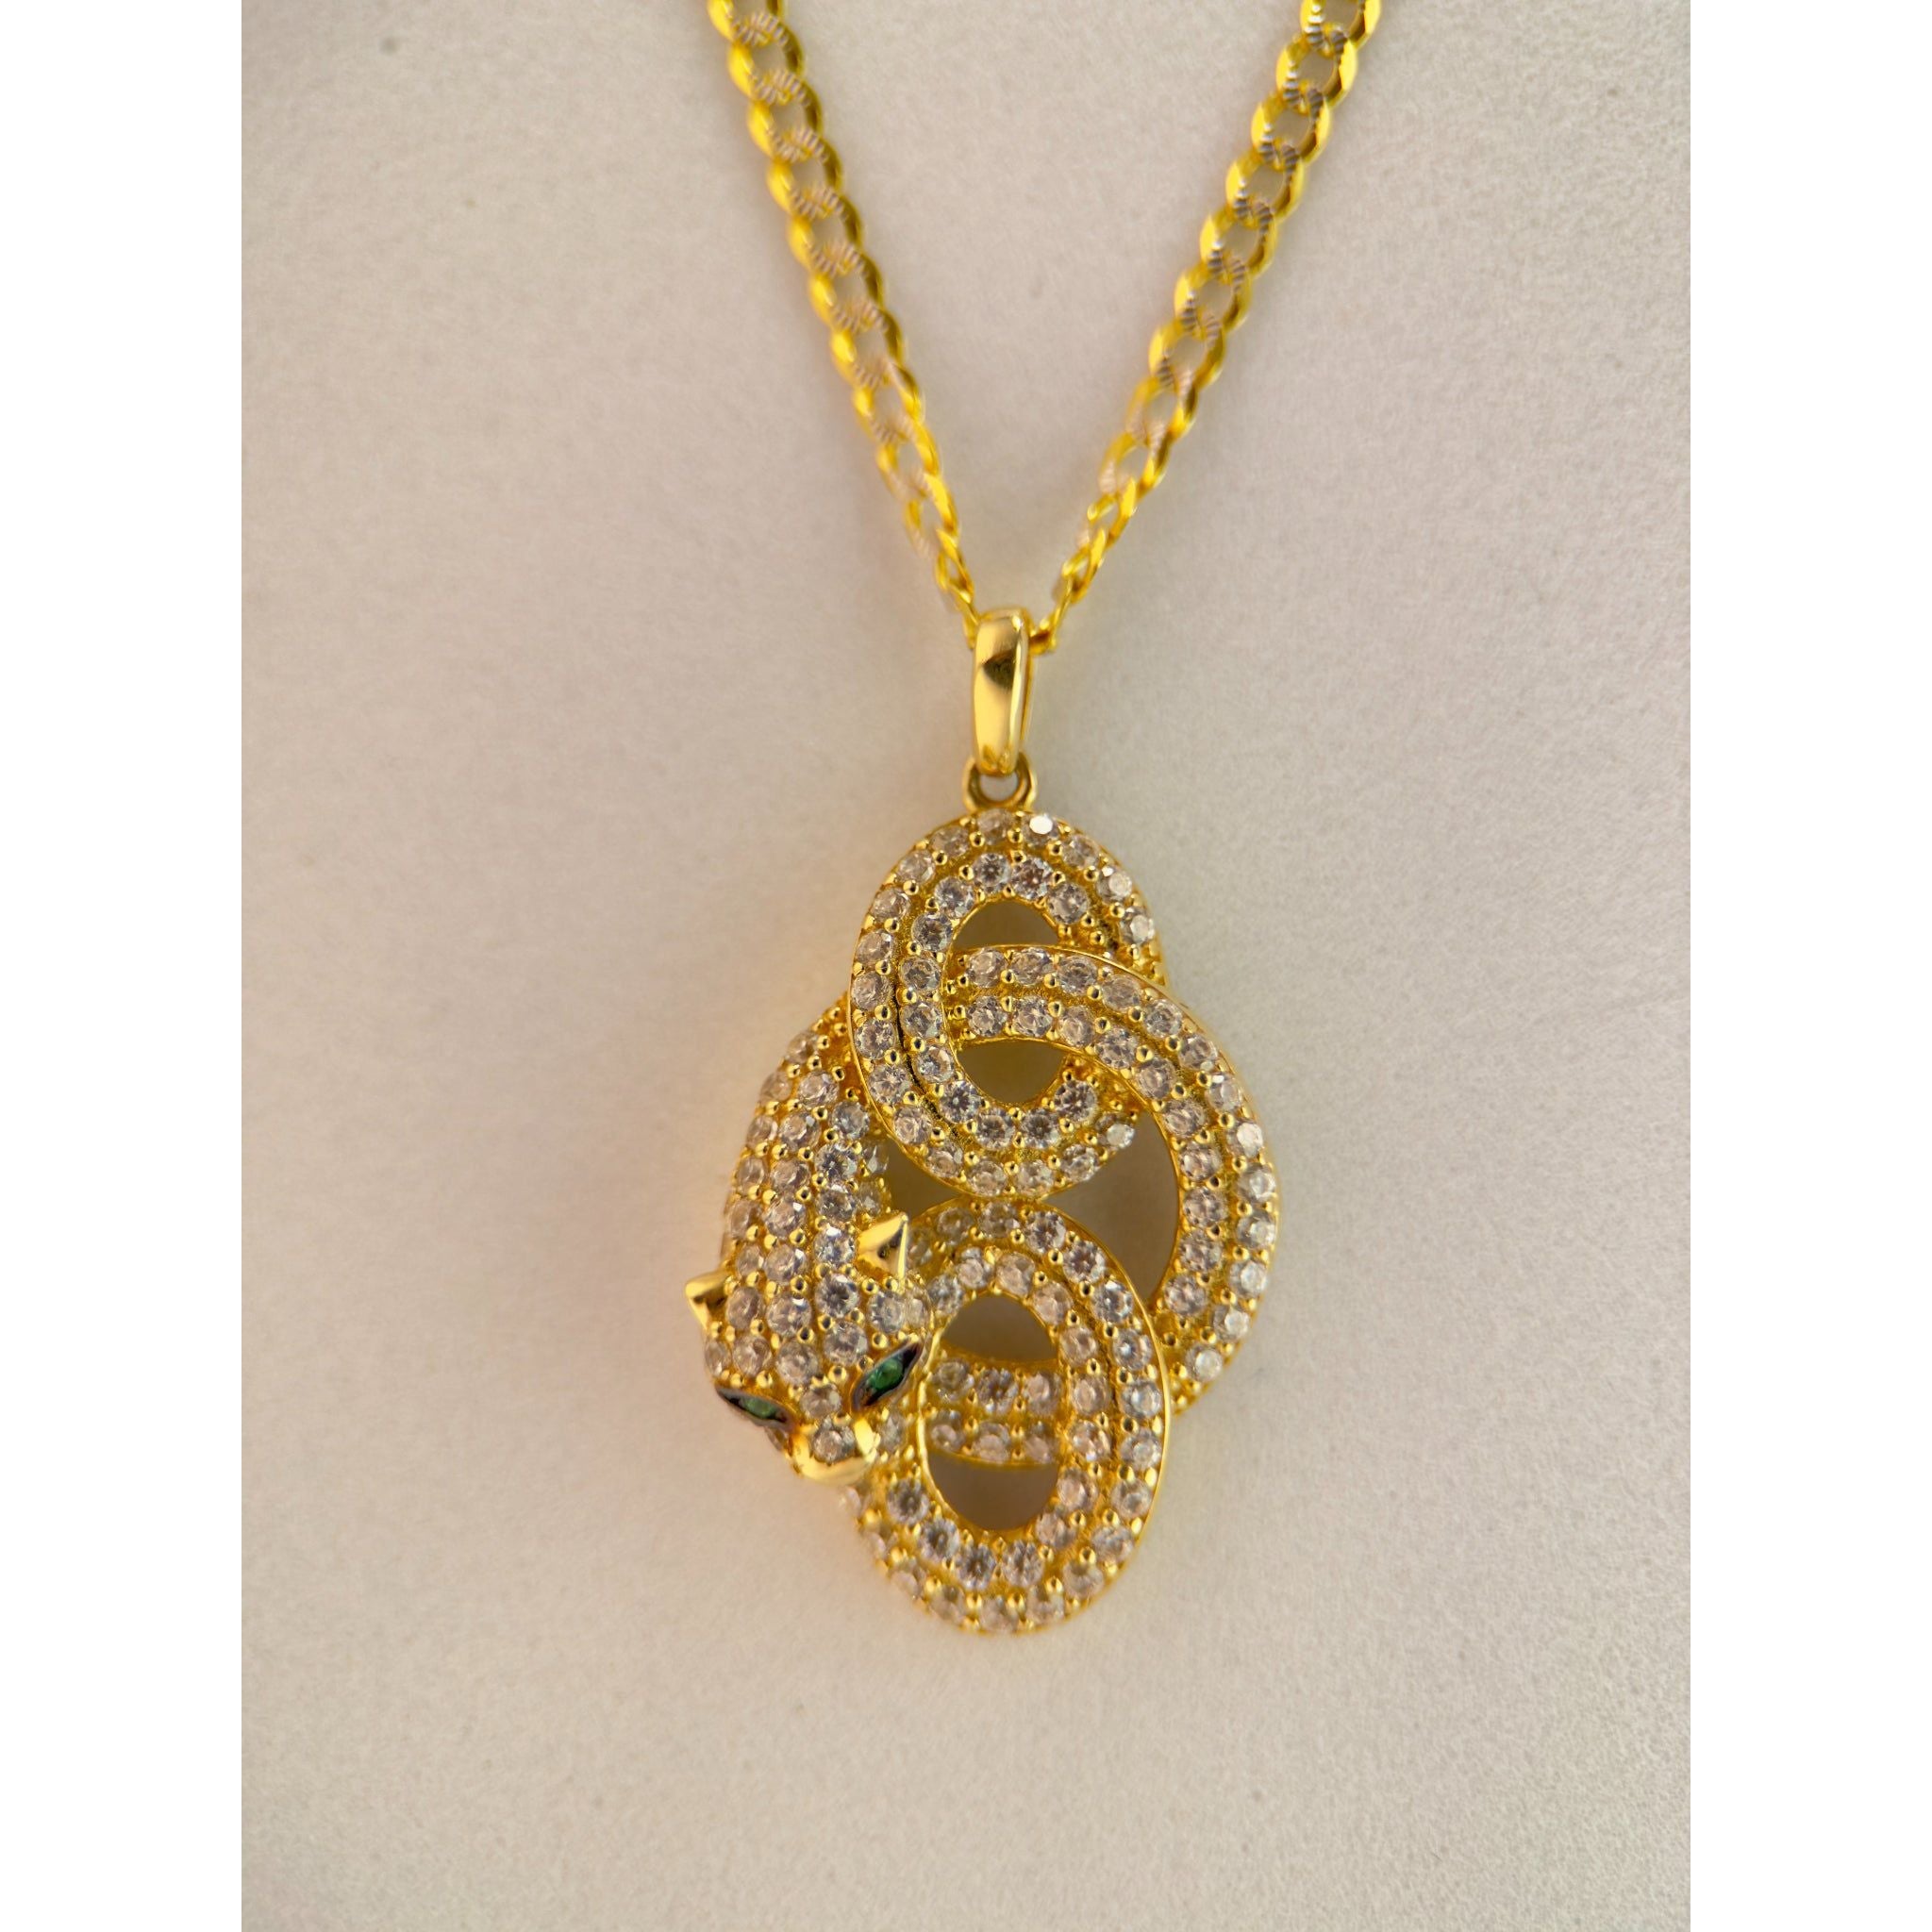 DR1926 - 14K Yellow Gold - Lab Created Stones - Gold Chain & Charm - 14K Gold Snake w/Emerald Eyes